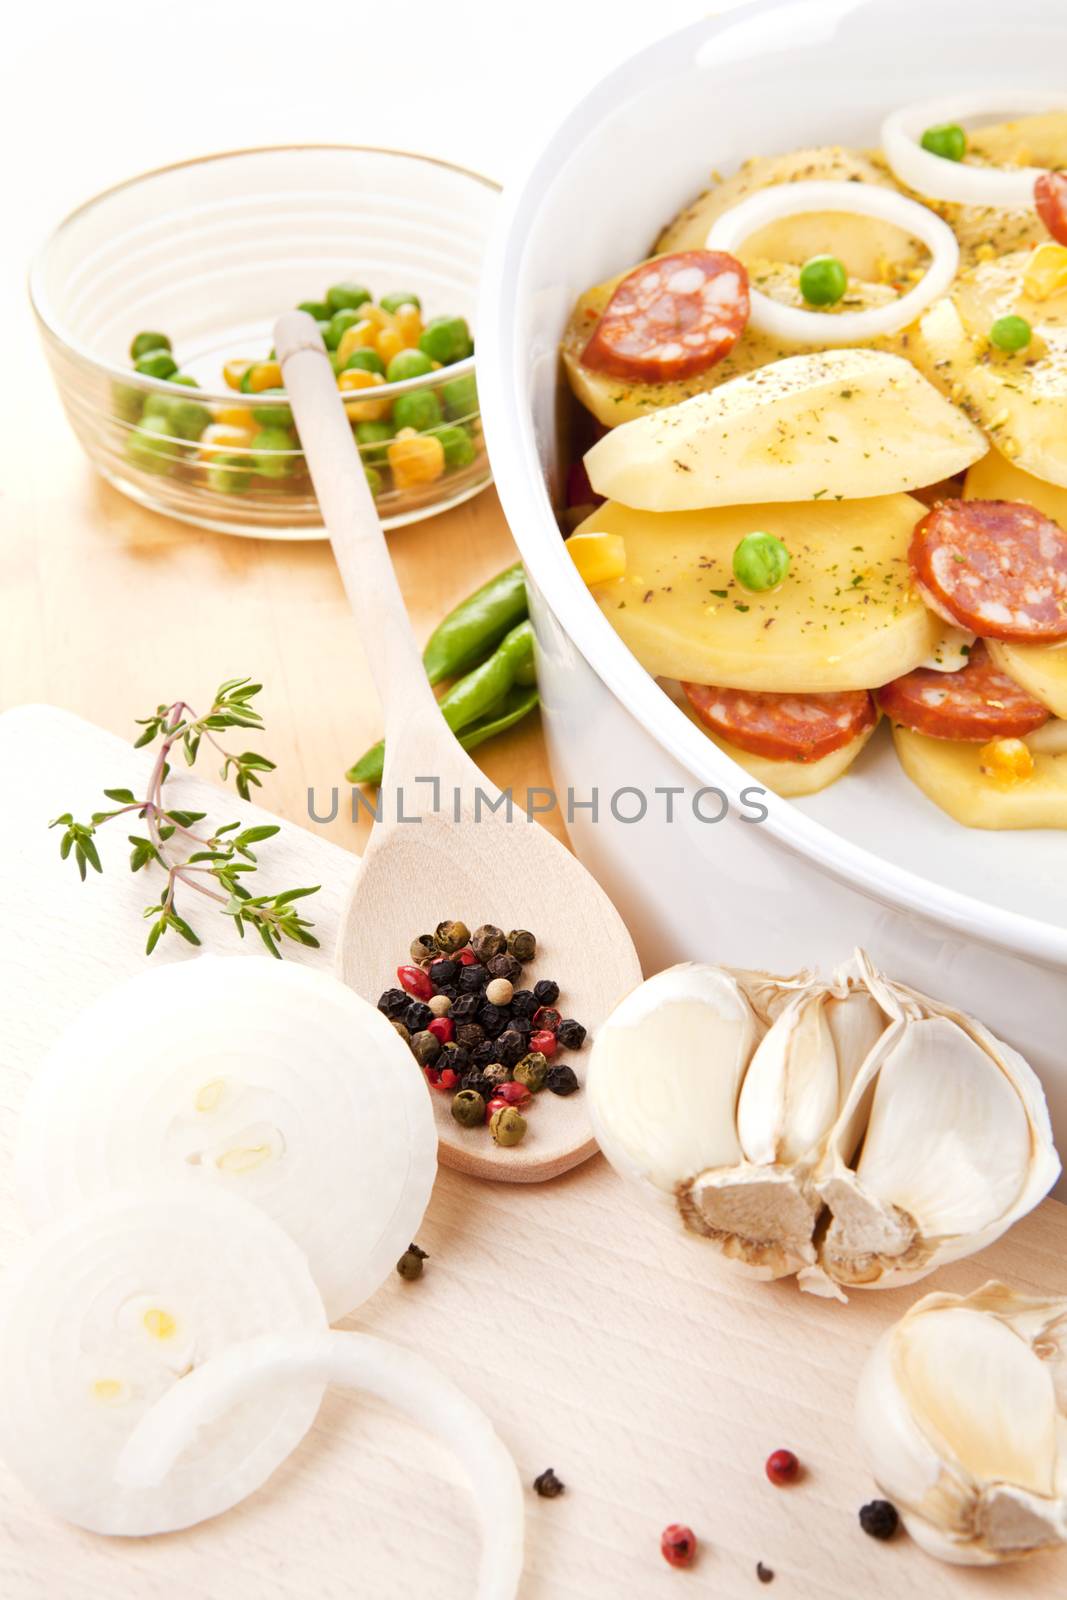 Fresh potatoes slices with fresh vegetables and sausage prepared for baking in bowl on wooden table.